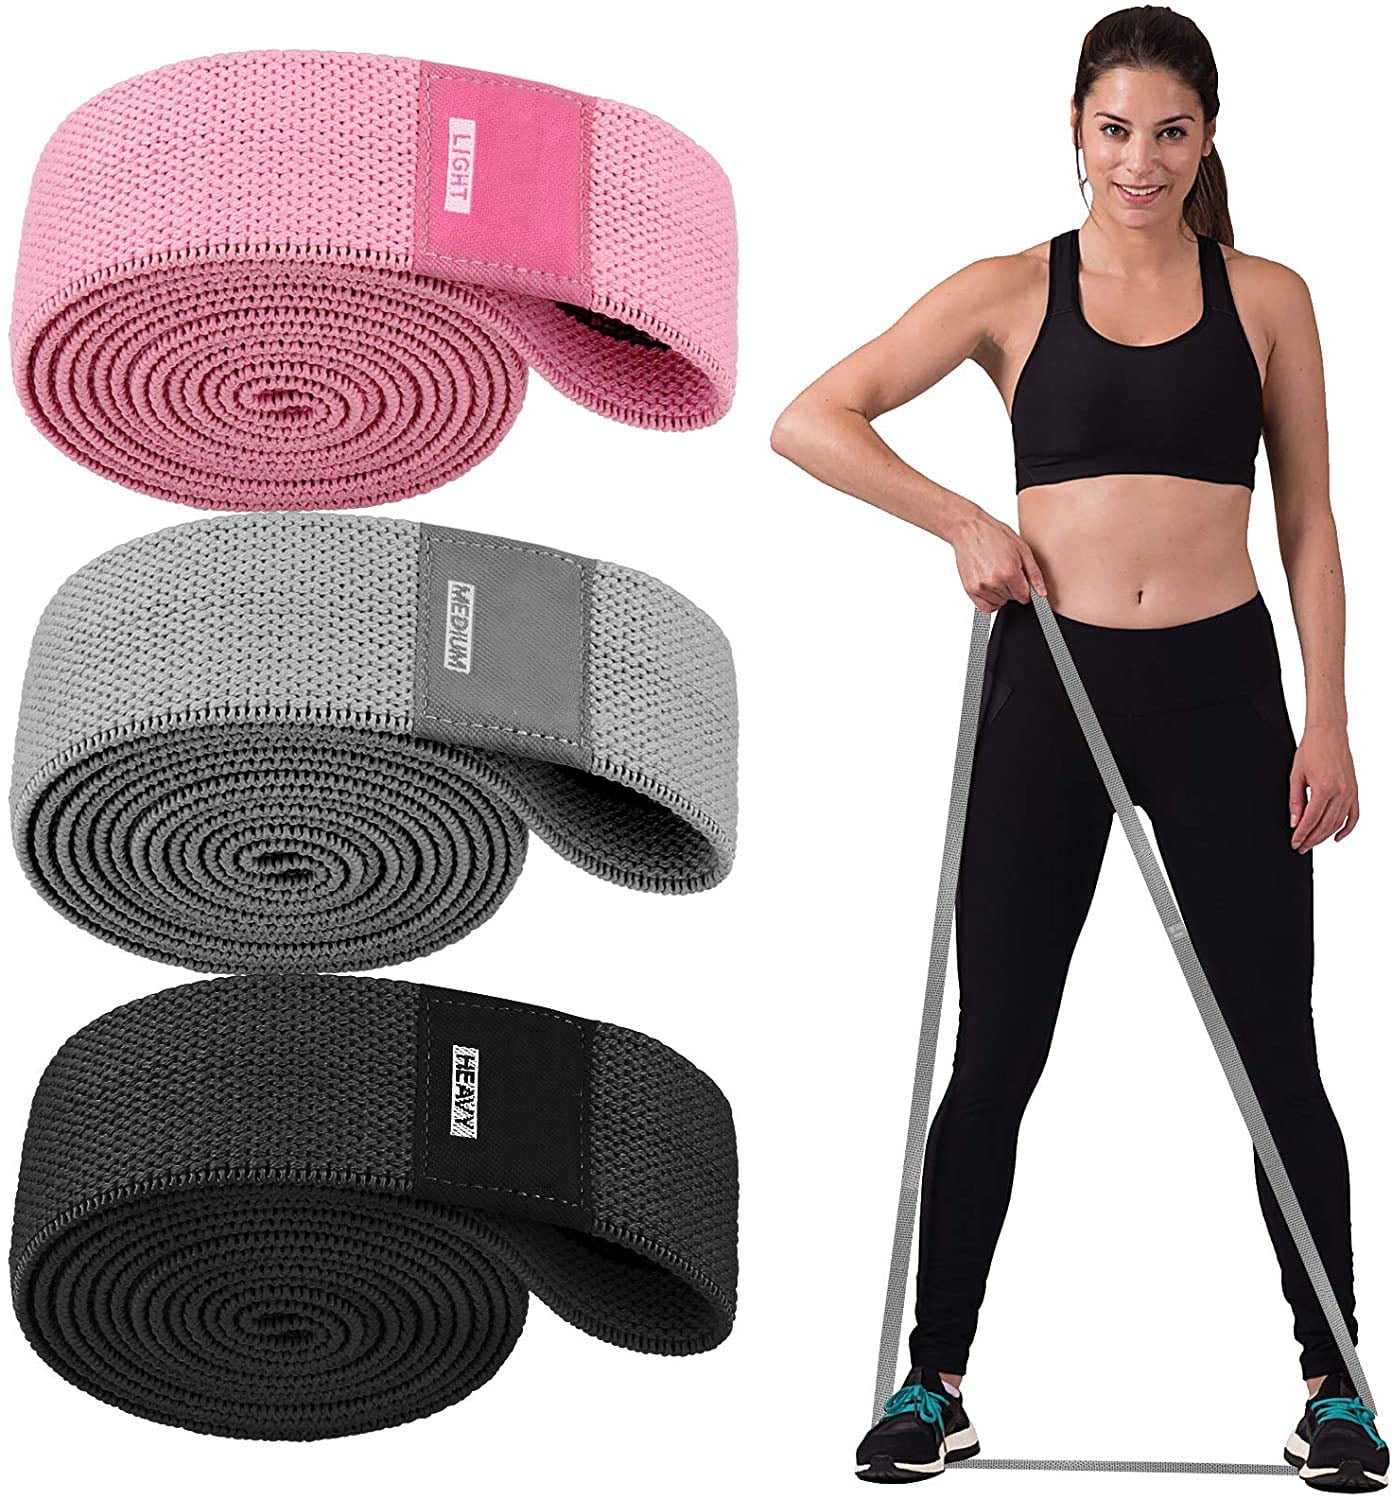 Thigh Hip Resistance Loop Set Booty Exercise Resistance Bands-Light Medium Heavy 